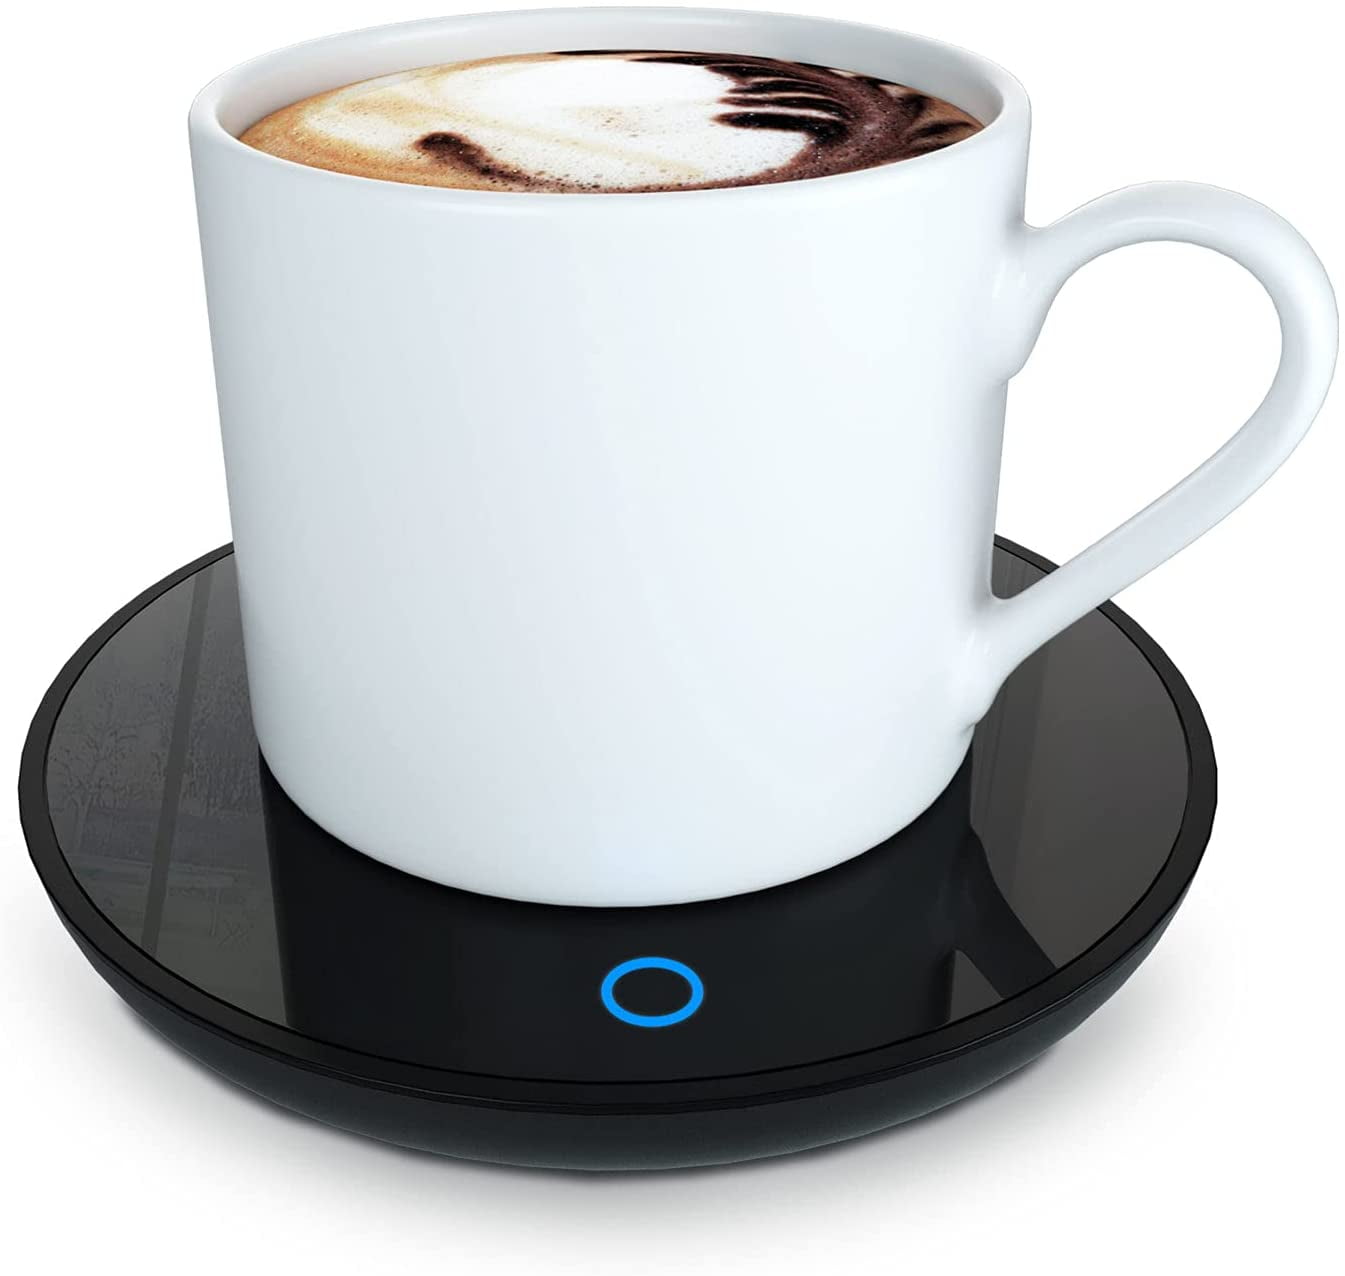 GCP Products GCP-US-564684 Mind Reader Usb Coffee Mug Warmer Set For Desk,  Tea Cup Warmer, Electric Warming Plate For Drinks Beverage Water Cocoa Milk